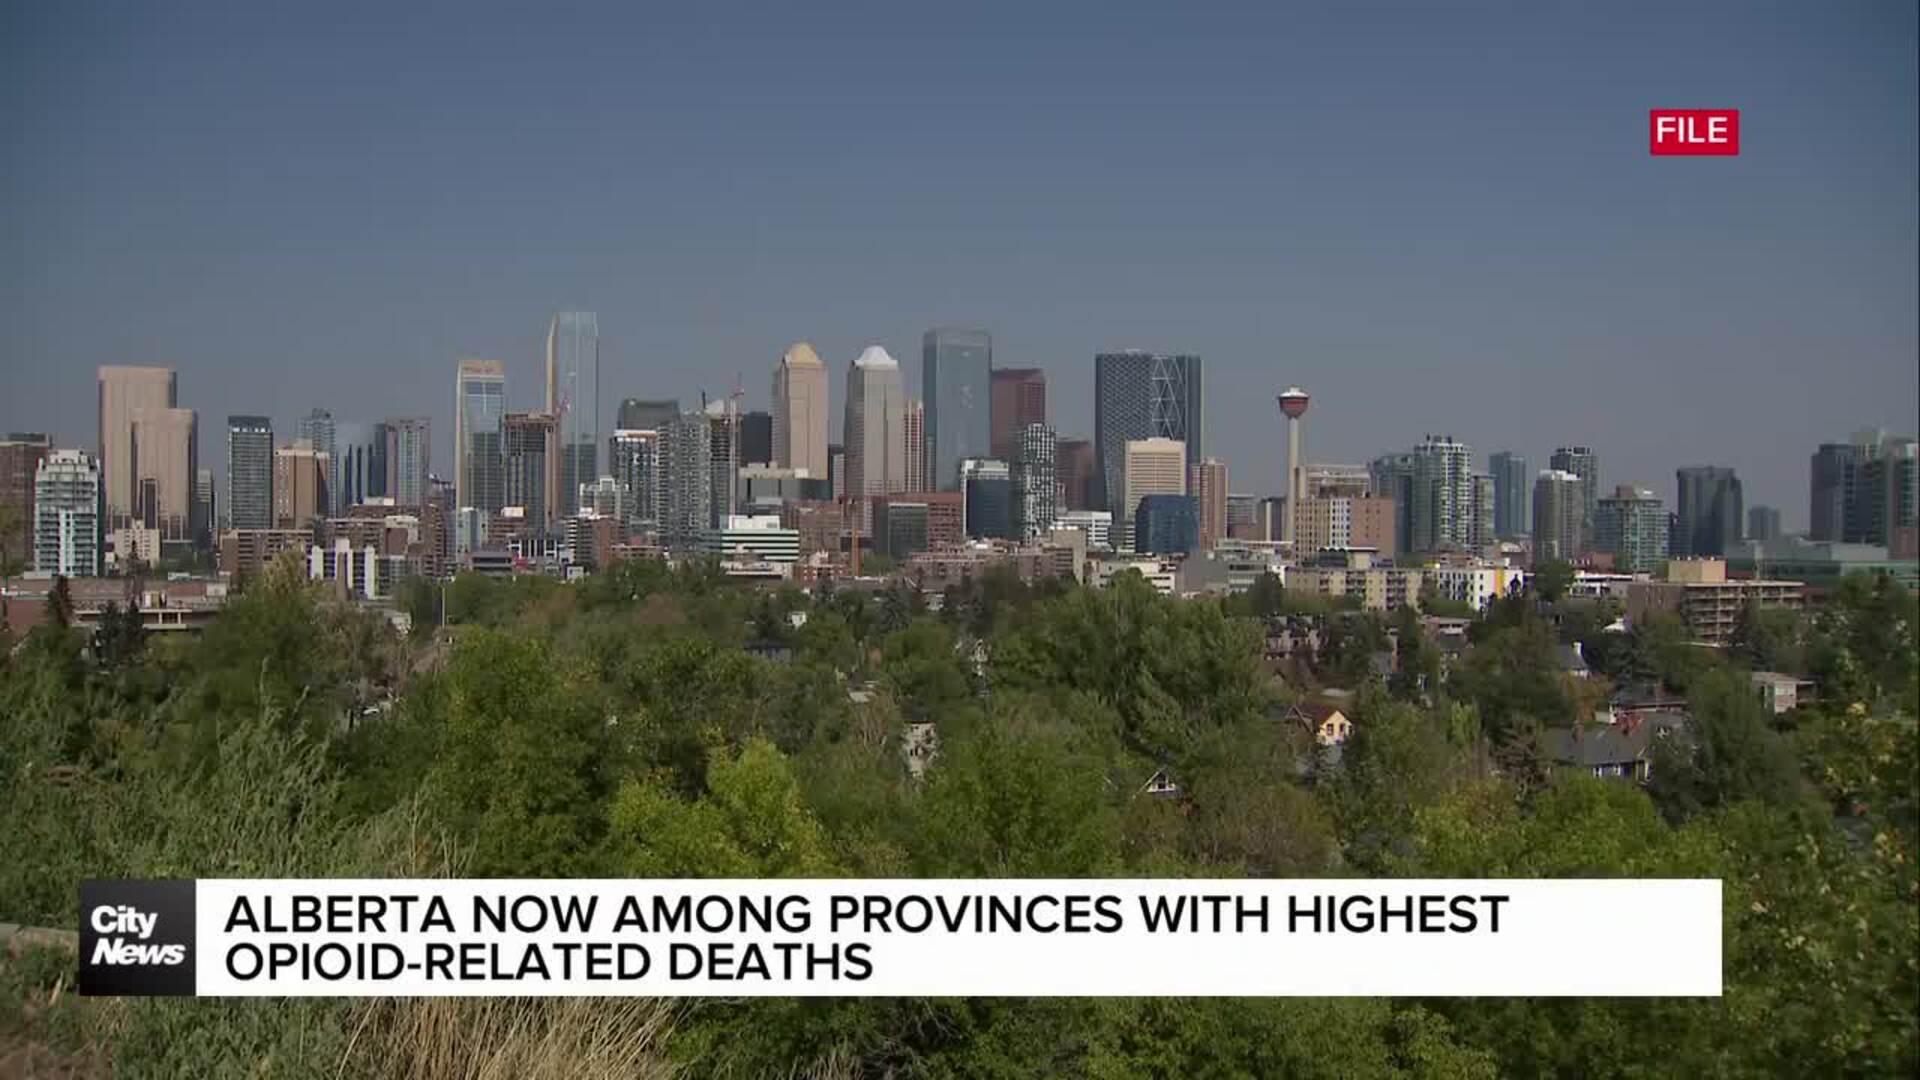 Alberta now among provinces with highest opioid-related deaths